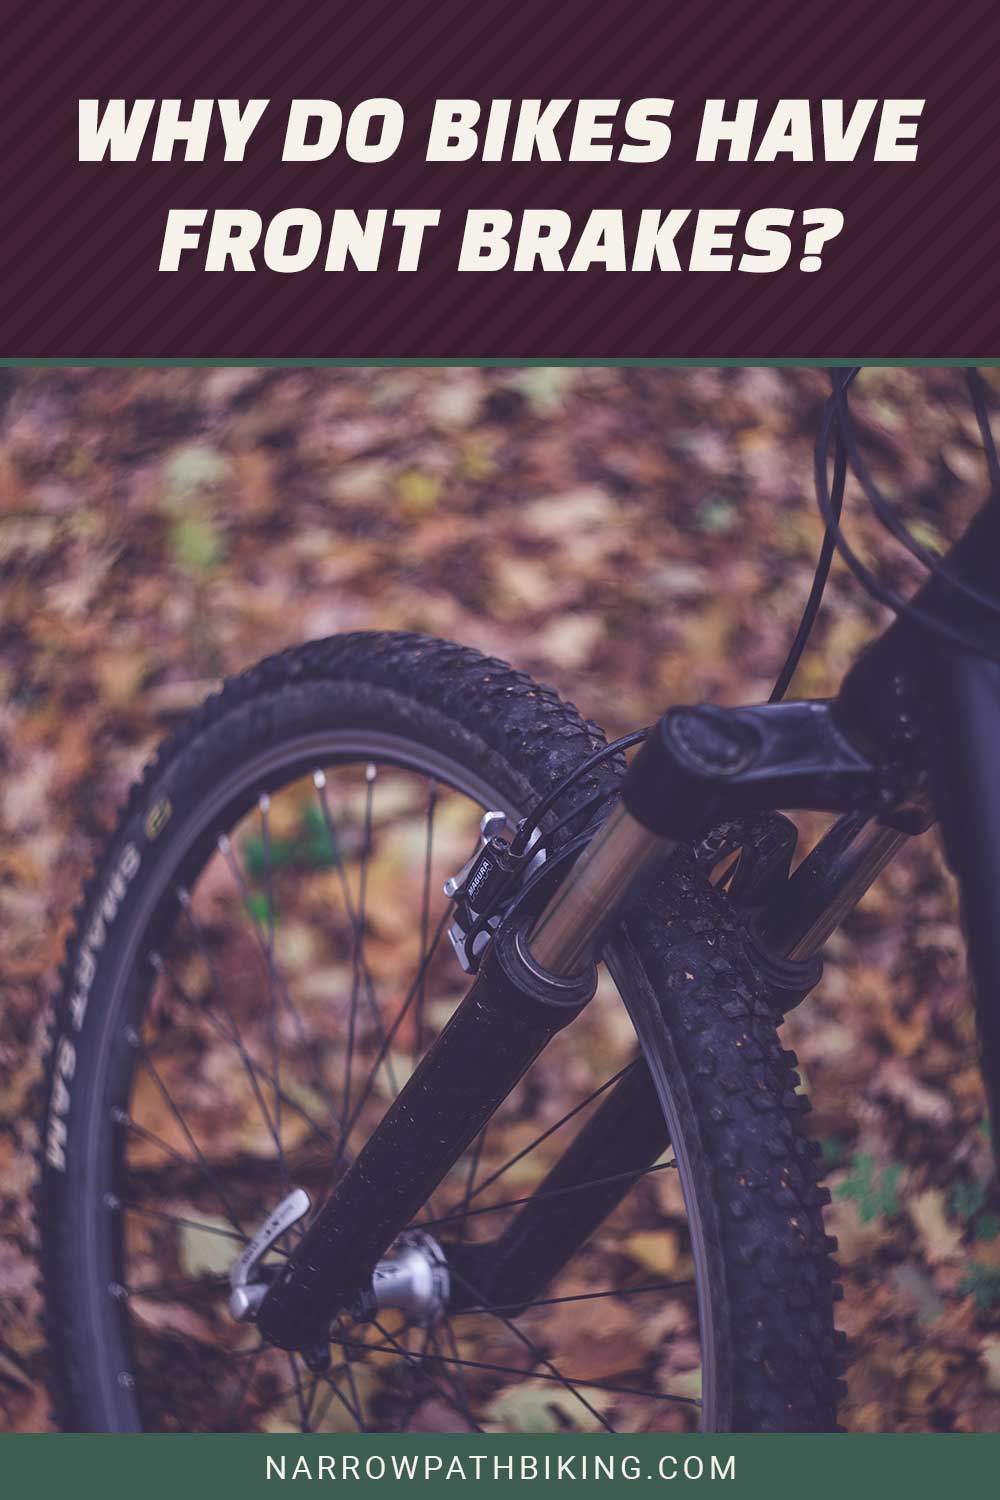 Why Do Bikes Have Front Brakes?